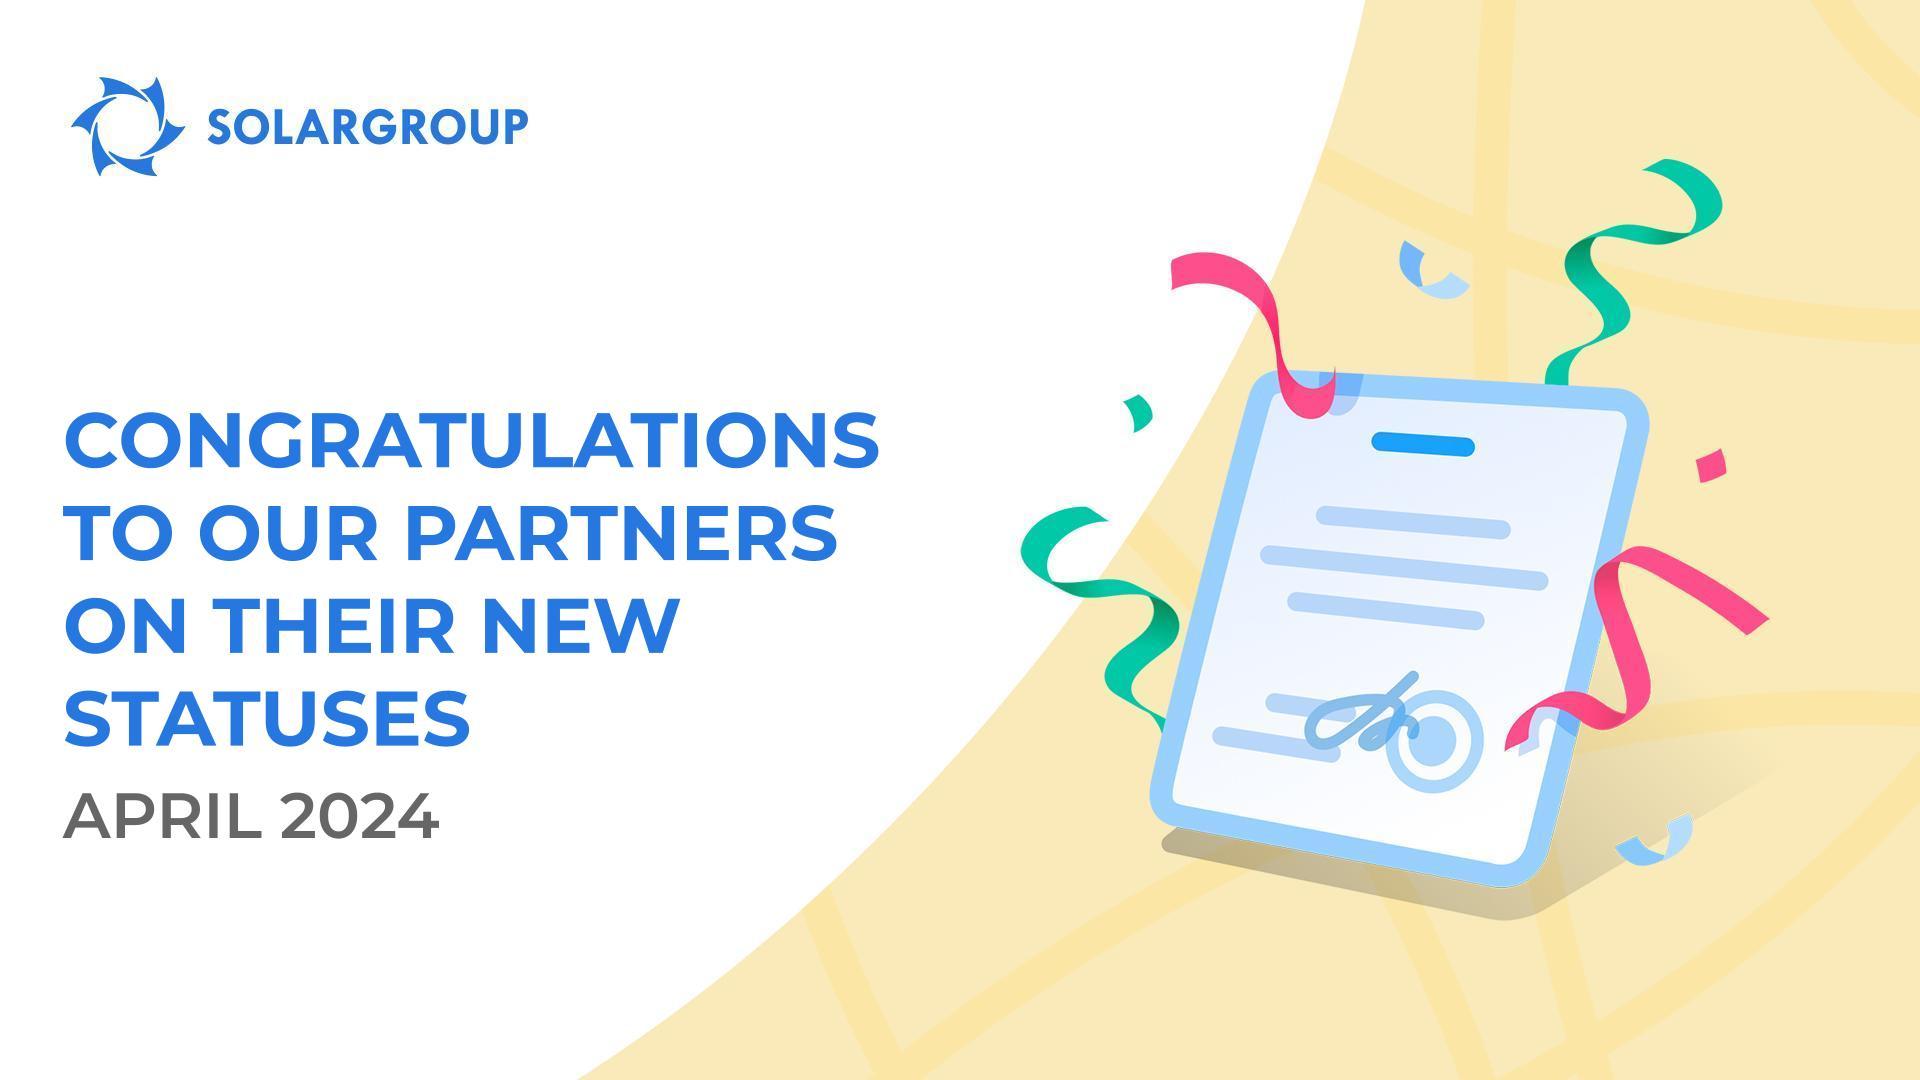 We welcome our partners to their new statuses!